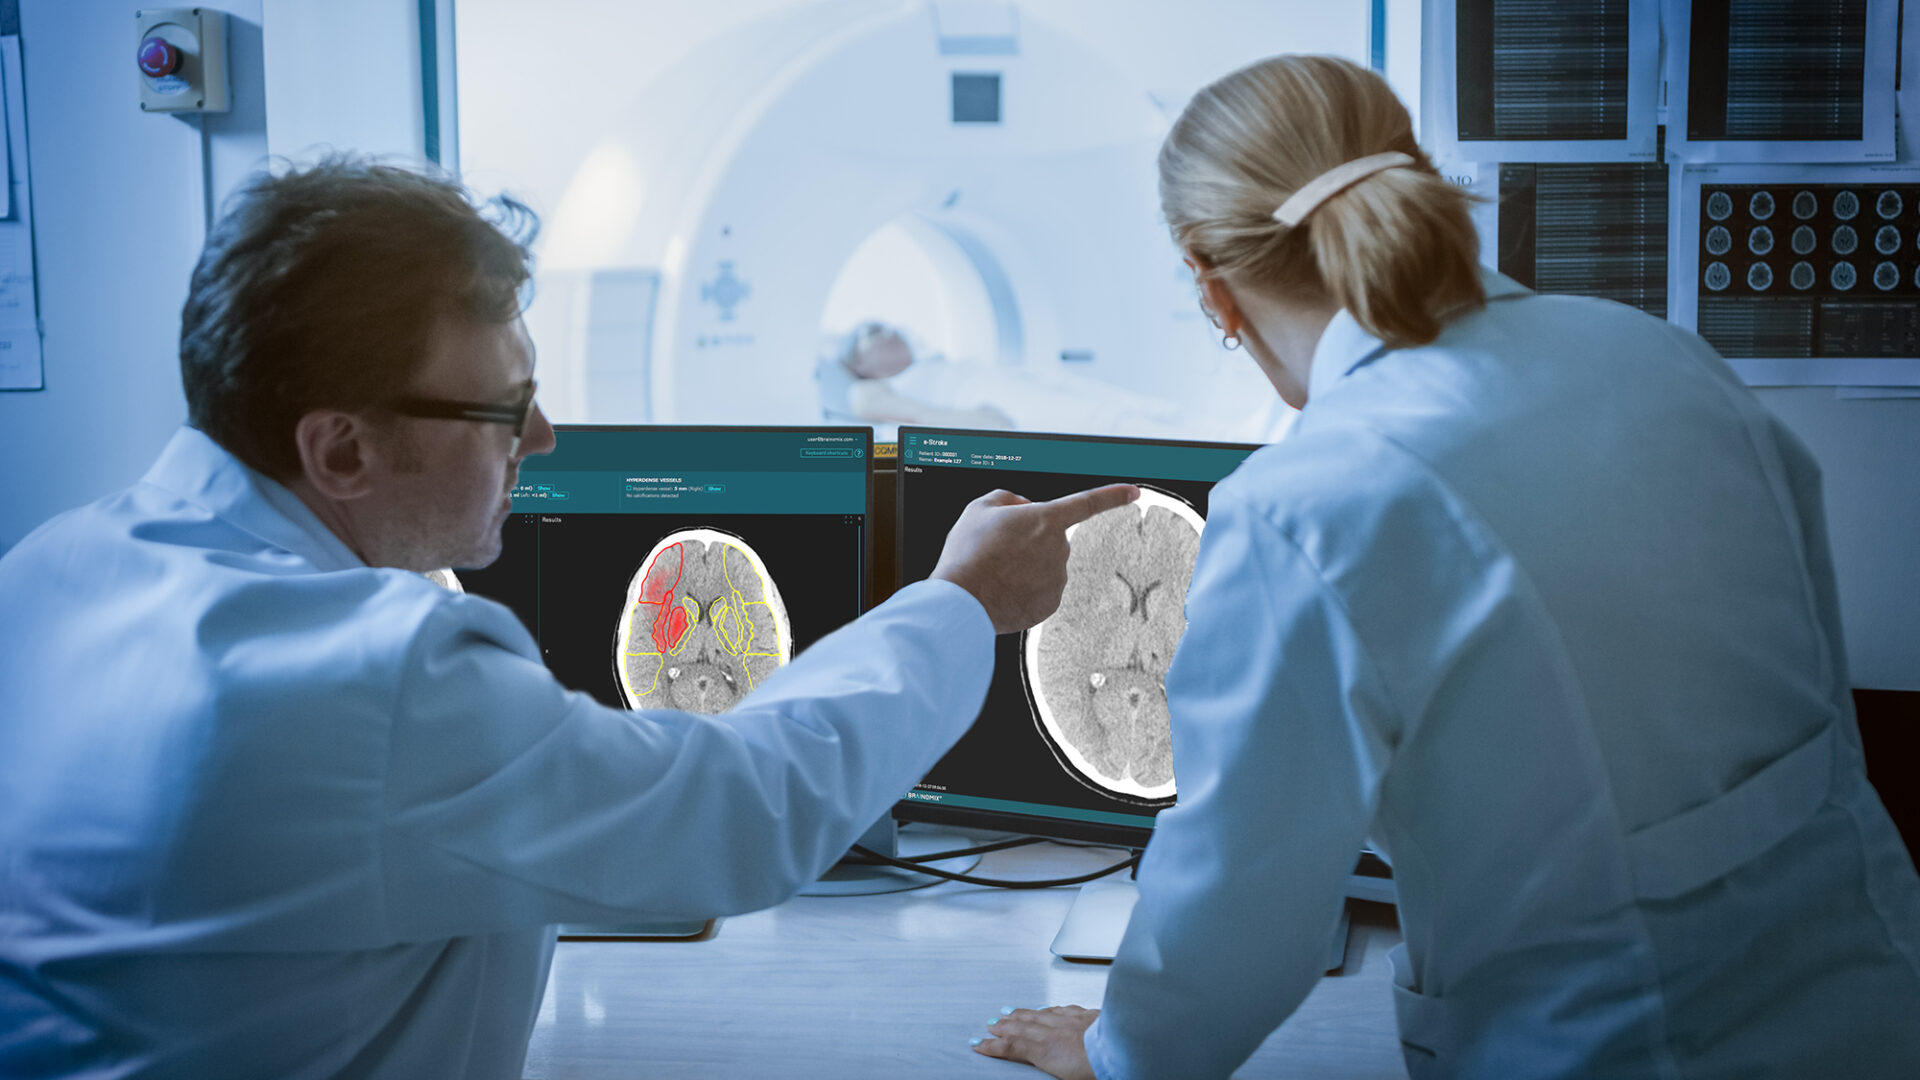 Harnessing AI to speed up access to stroke care